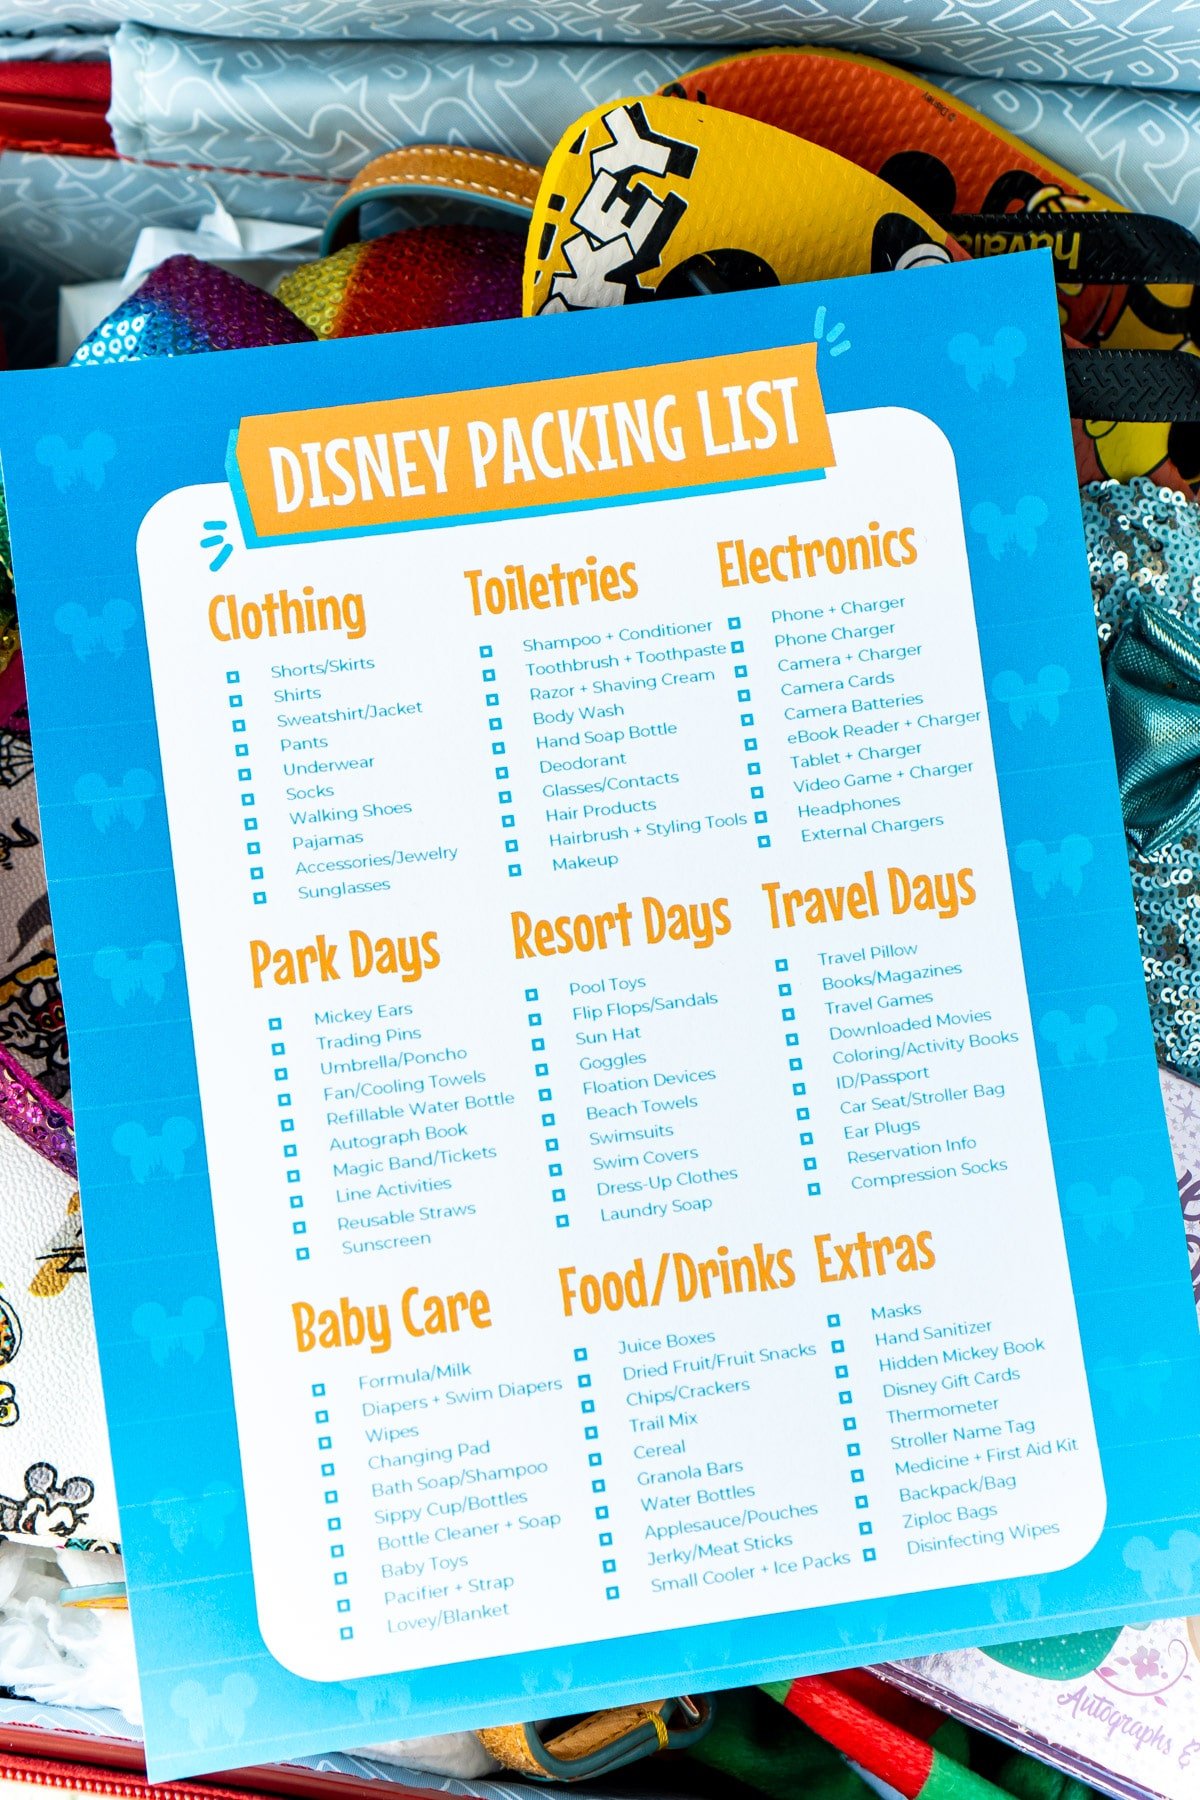 Disney packing list with a blue background on a Disney suitcase